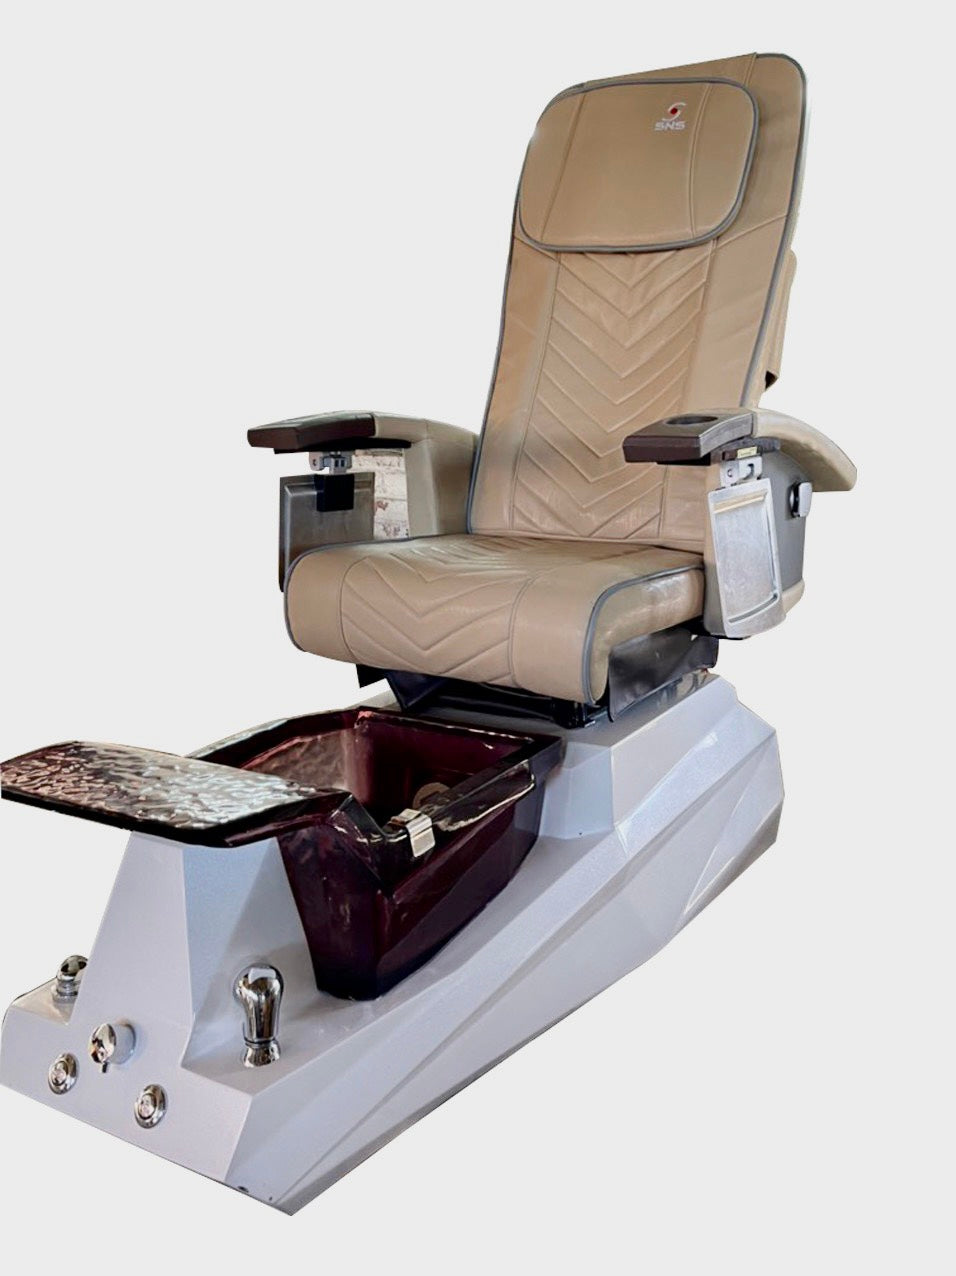 t4 Diamond F Pedicure Spa Chair : Sold Out